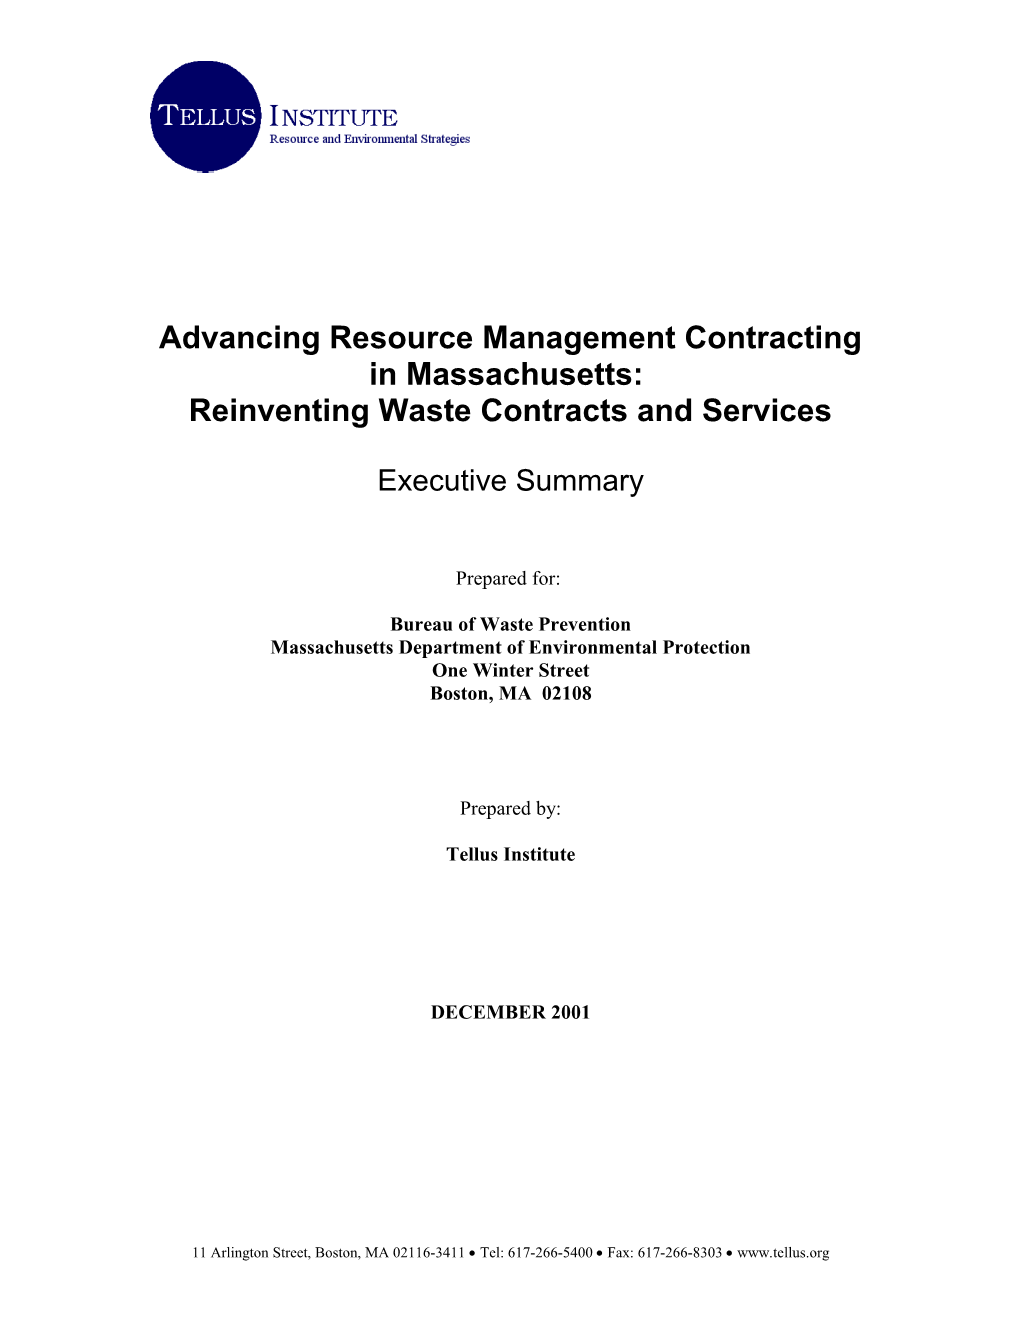 Advancing Resource Management Contracting in Massachusetts